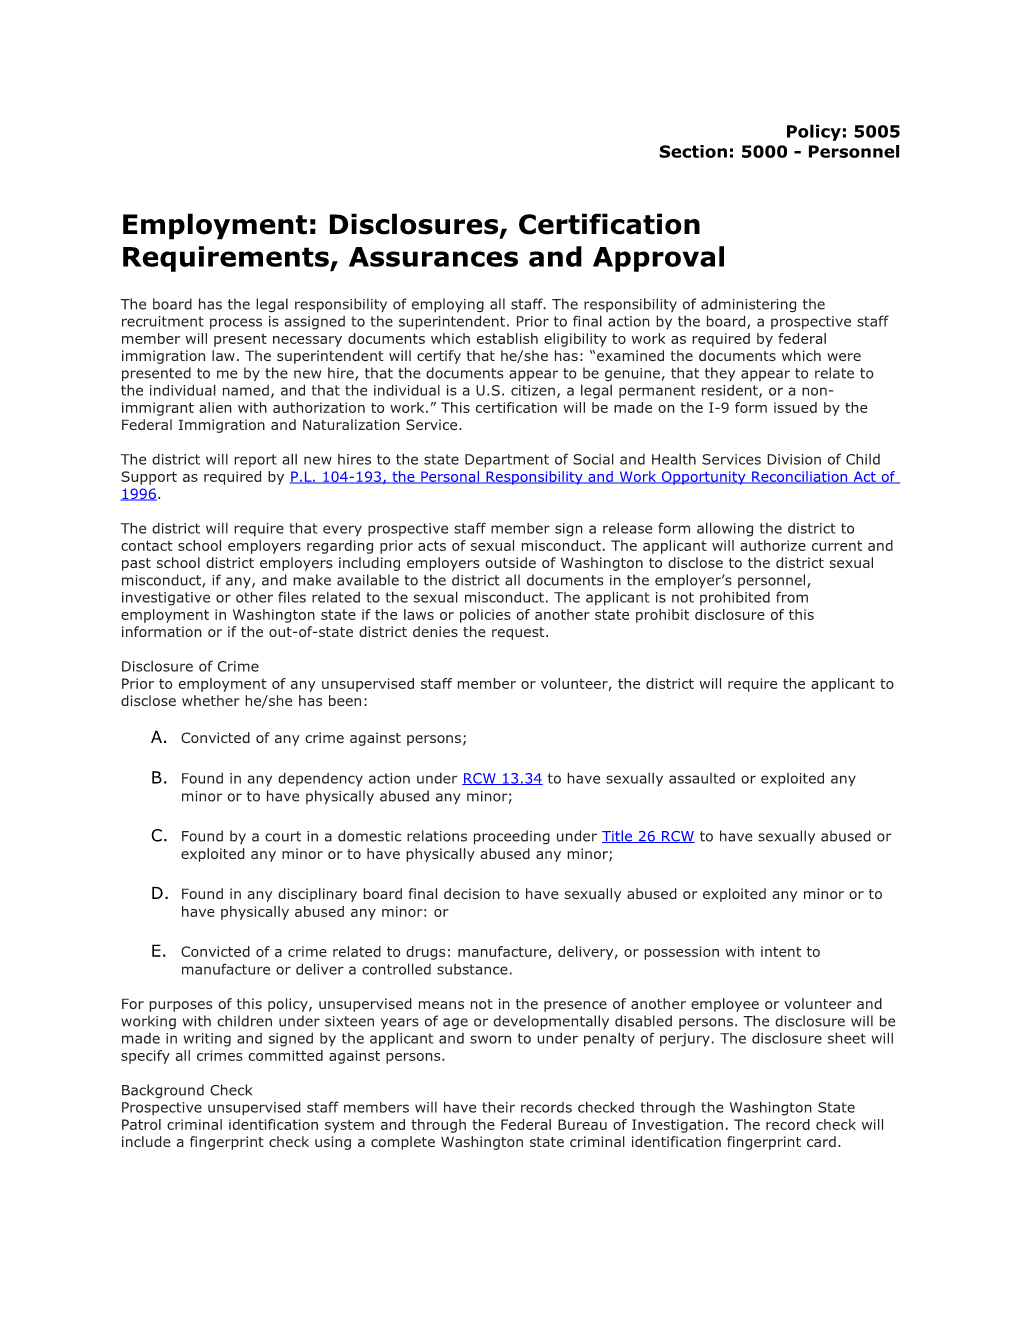 Employment: Disclosures, Certification Requirements, Assurances and Approval